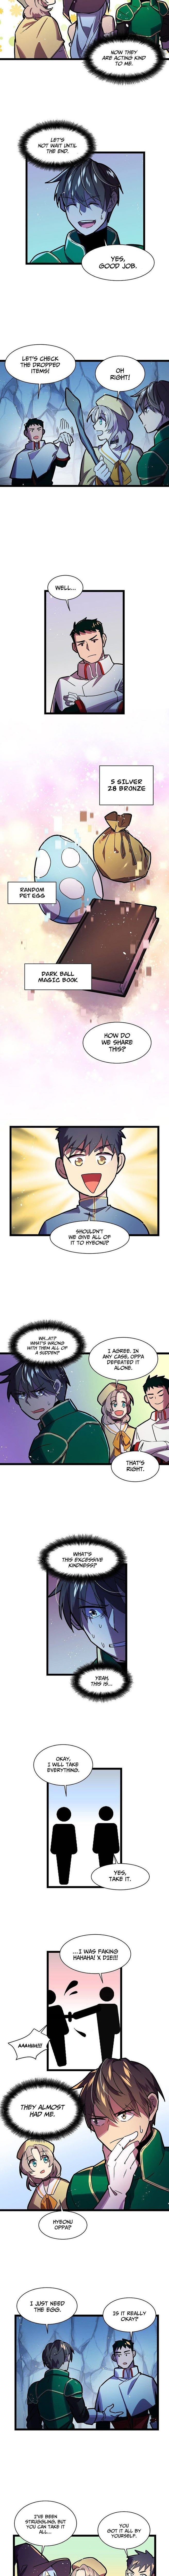 Ranker’s Return Chapter 11 - Page 5